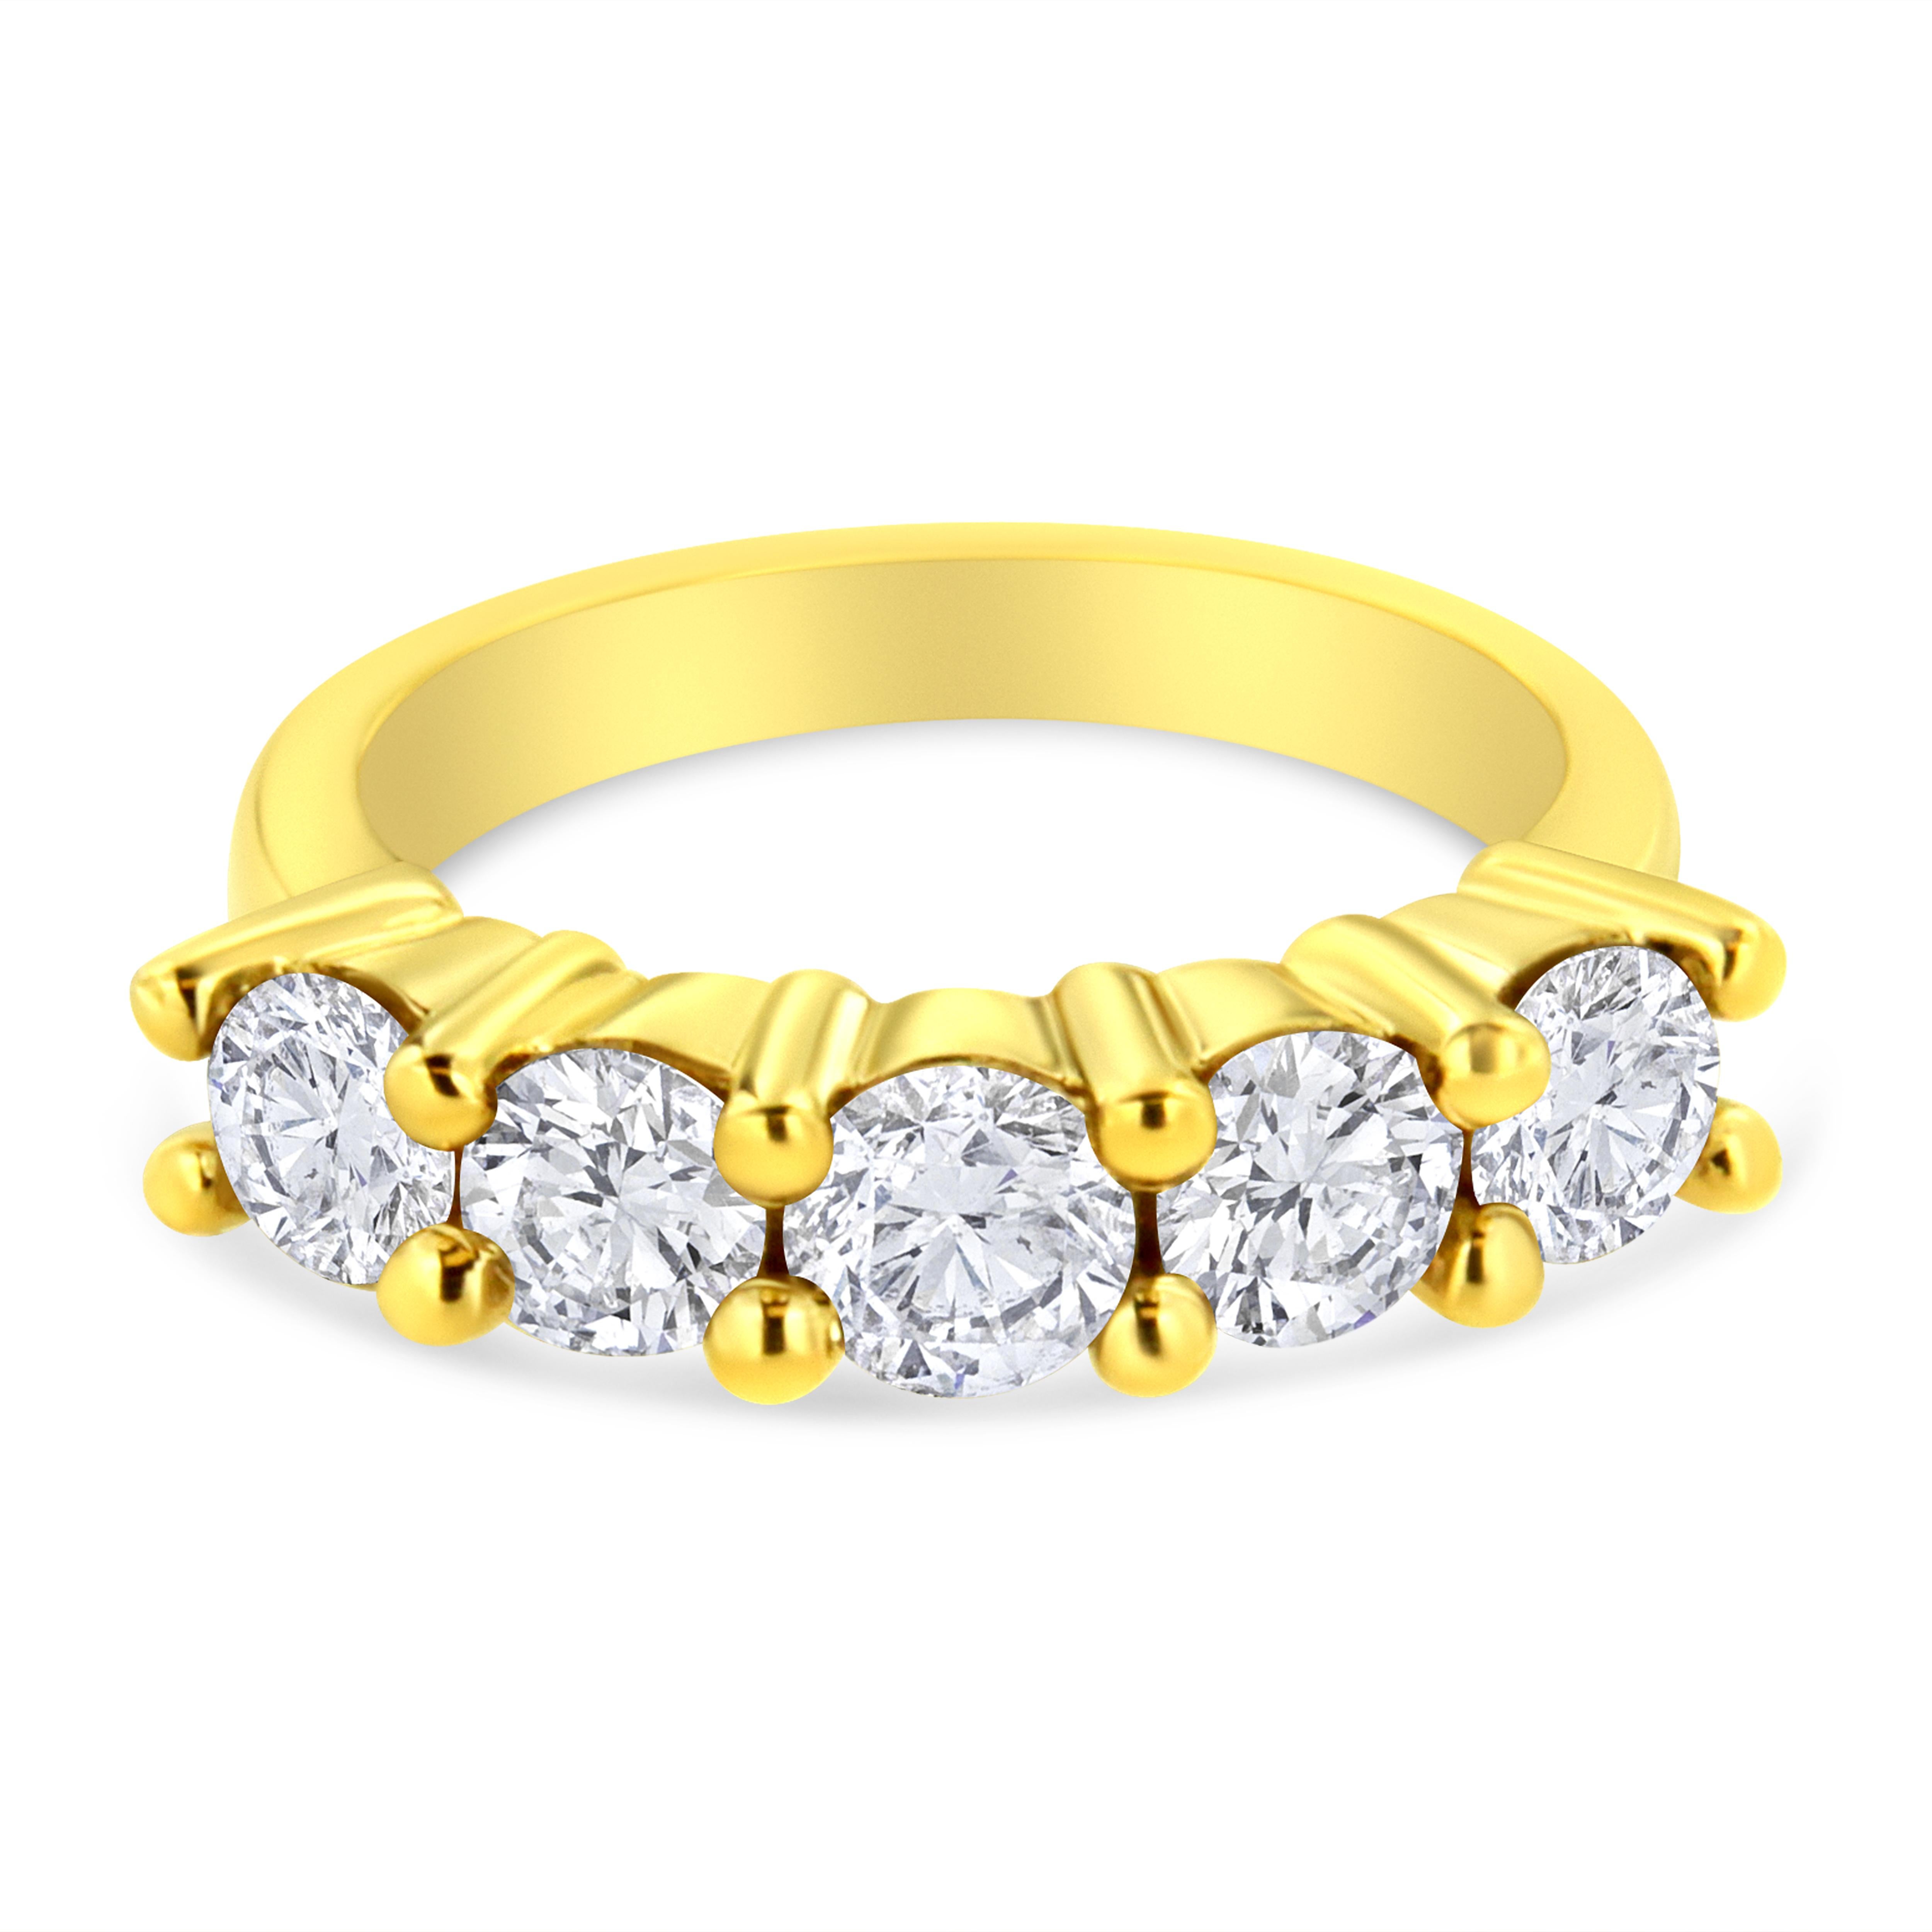 For Sale:  Yellow Gold Plated Sterling Silver 2.0 Carat Diamond 5 Stone Wedding Band Ring 2